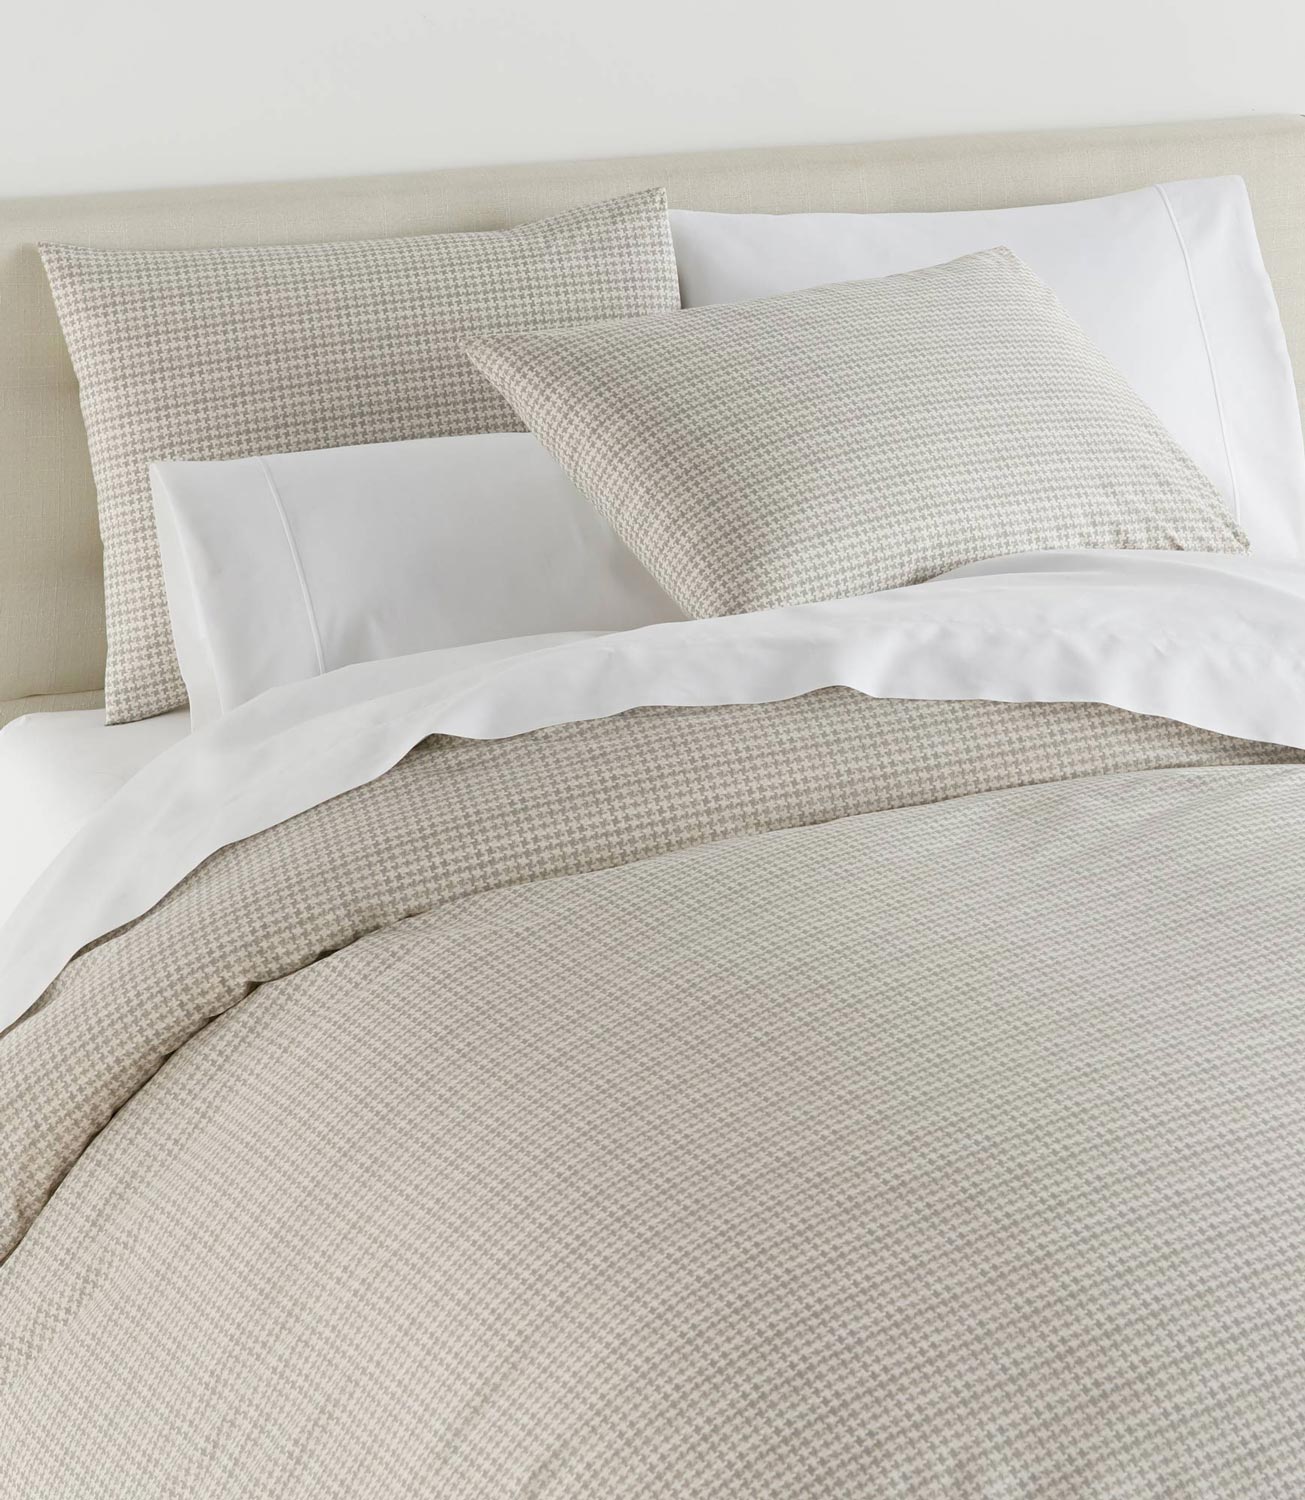 Houndstooth Percale Sleeping Shams Greige on bed